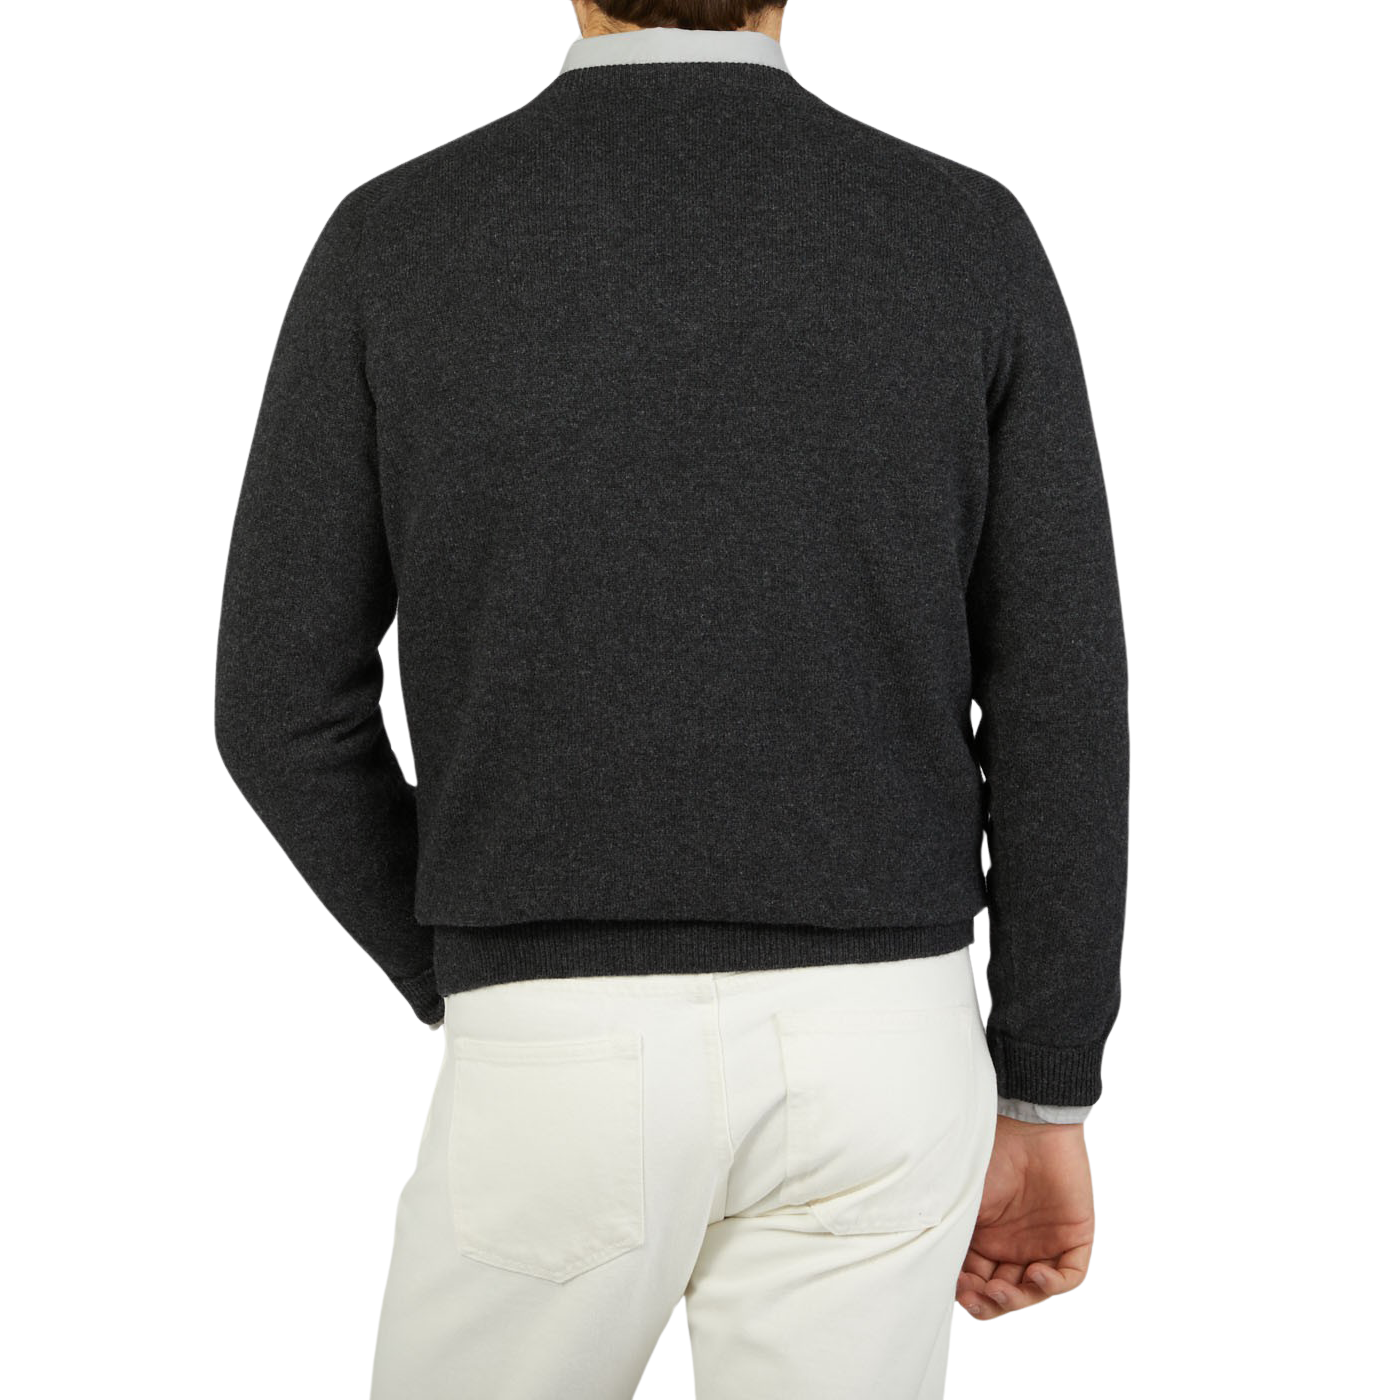 The back view of a man wearing a William Lockie Charcoal Grey V-neck Lambswool Sweater.